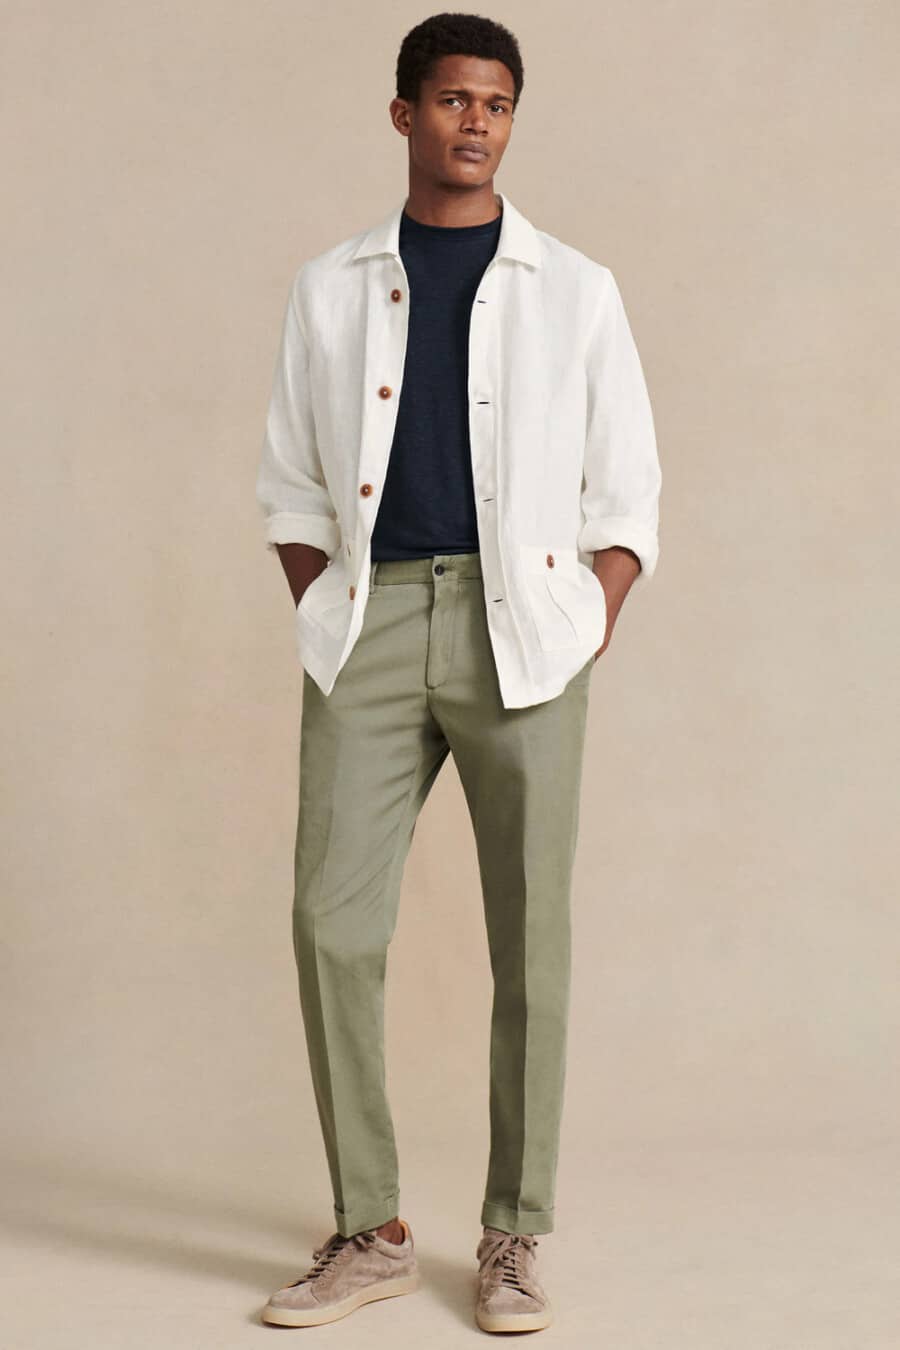 Men's light green tailored pants, tucked in navy T-shirt, open white overshirt and brown suede sneakers outfit